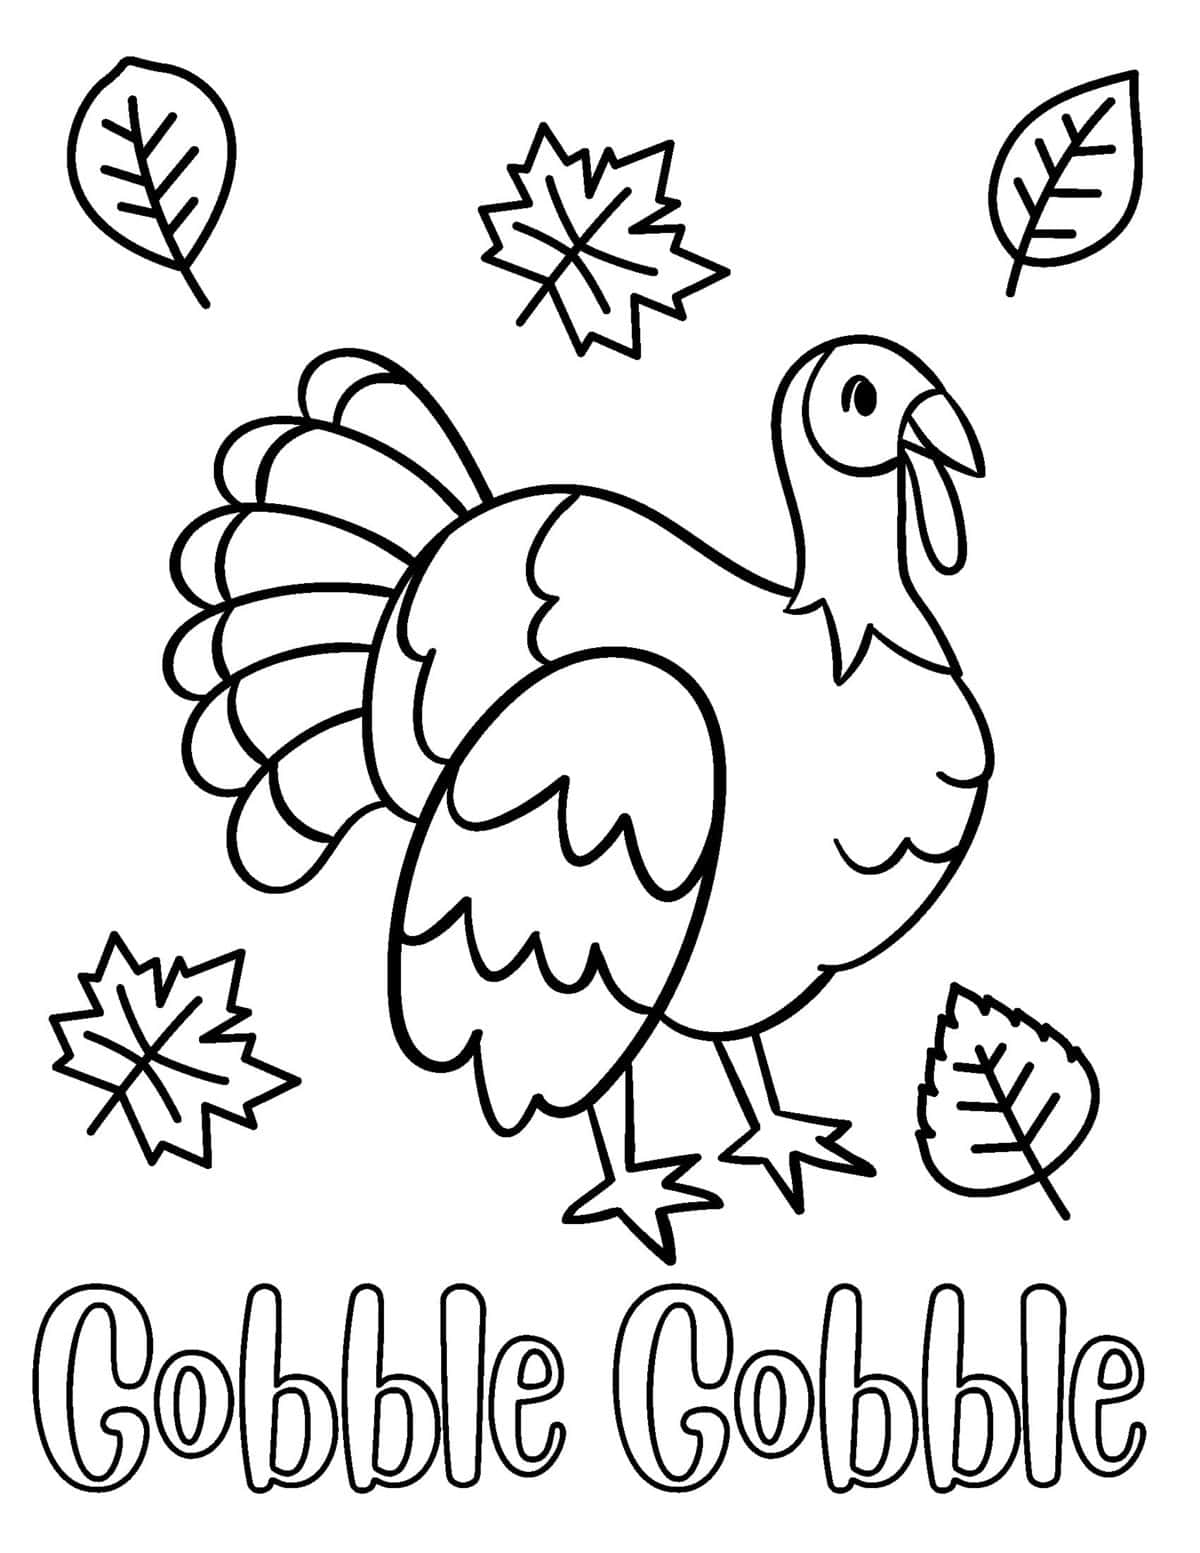 gobble gobble turkey coloring page